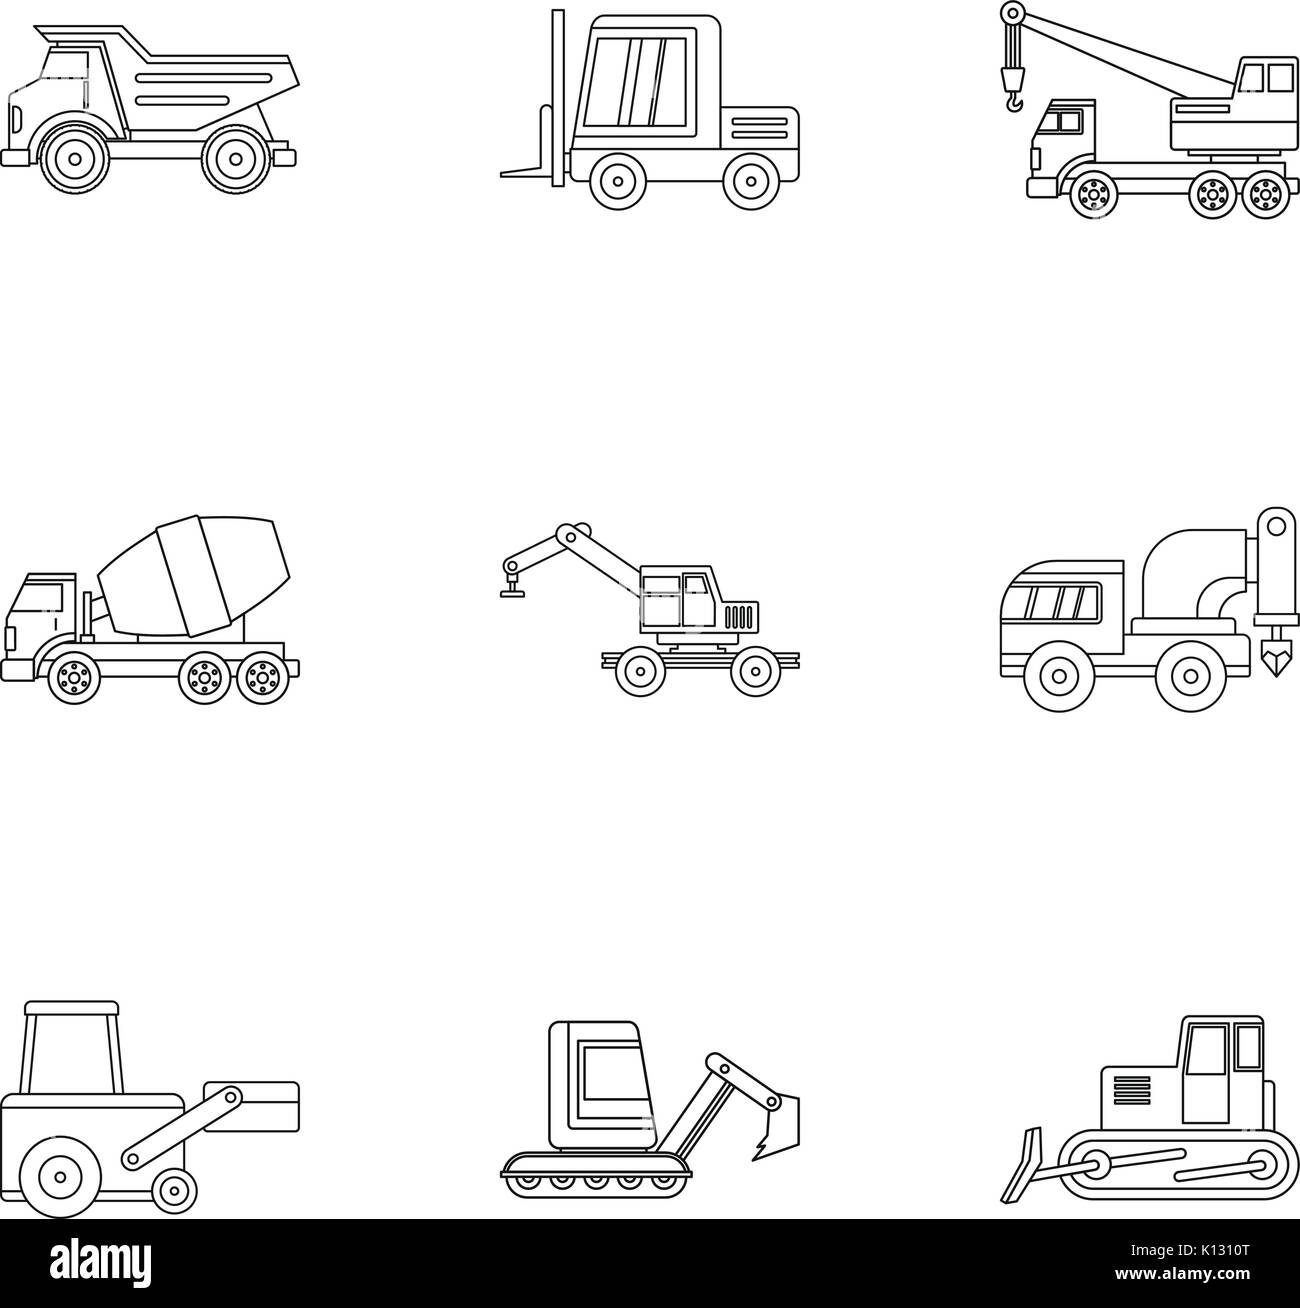 Industrial vehicle icon set, outline style Stock Vector